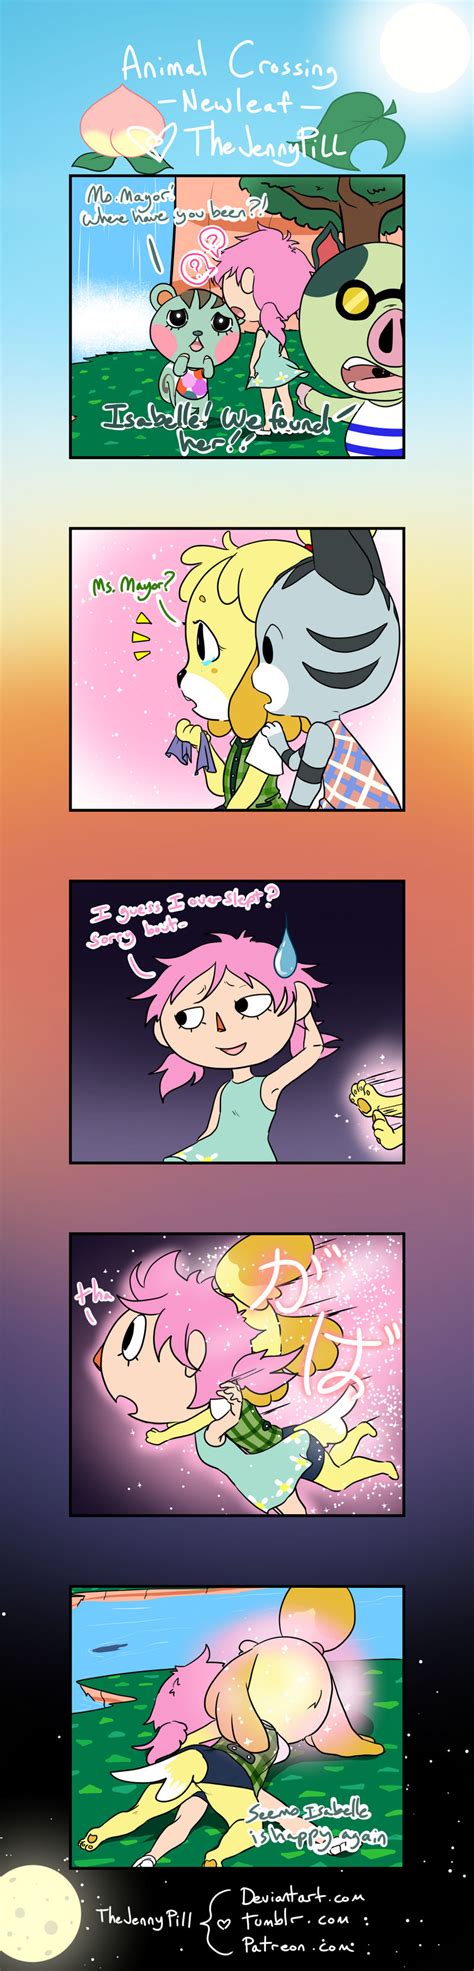 Animal Crossing New Leaf Comic 69 By Thejennypill On Deviantart